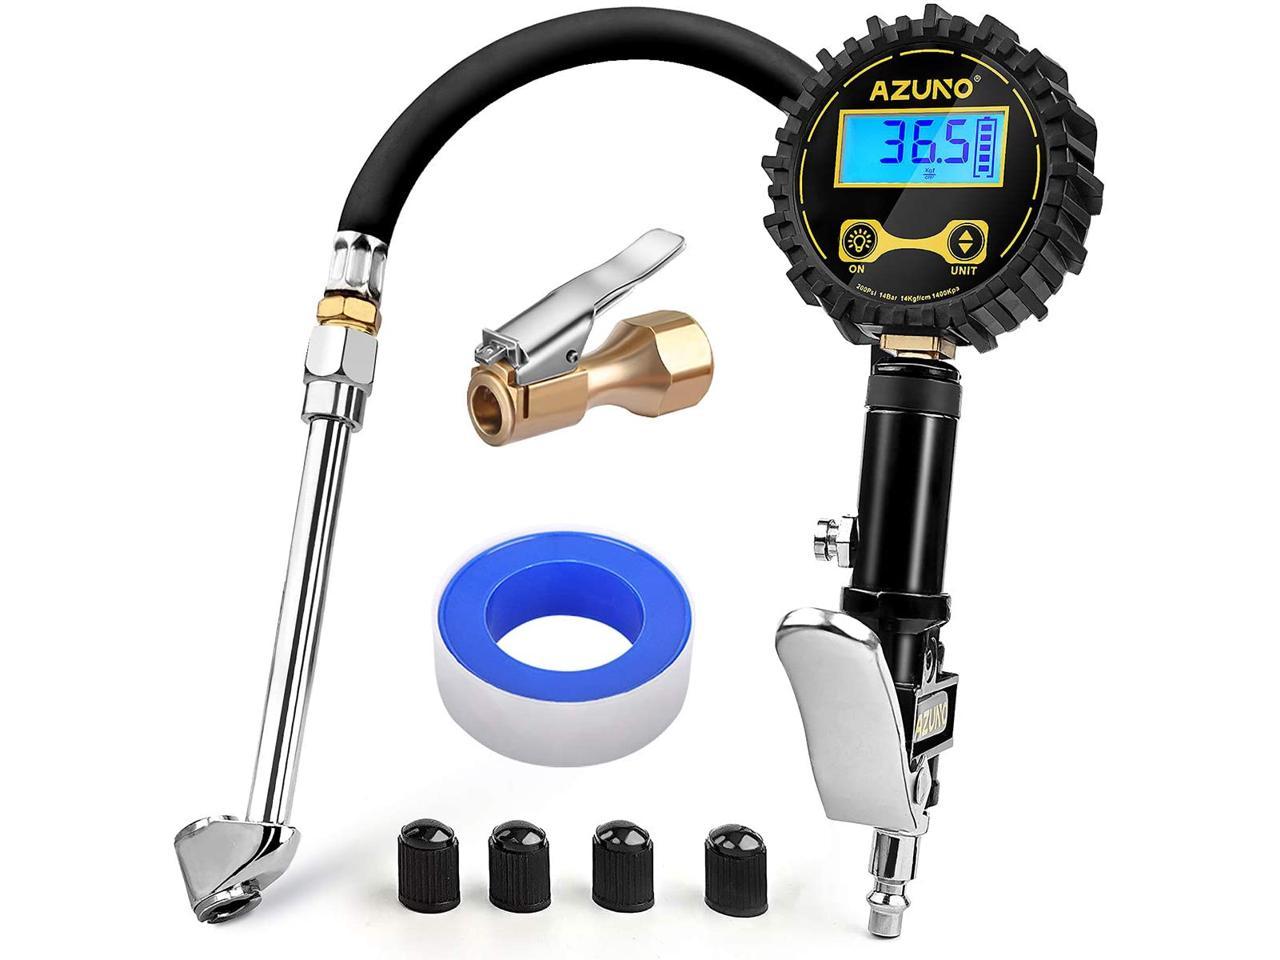 Digital Tire Inflator Pressure Gauge,with Medium 250 PSI Air Chuck and Compressor Accessories ，Heavy Duty with Rubber Hose and Quick Connect Coupler for 0.1 Display Resolution 